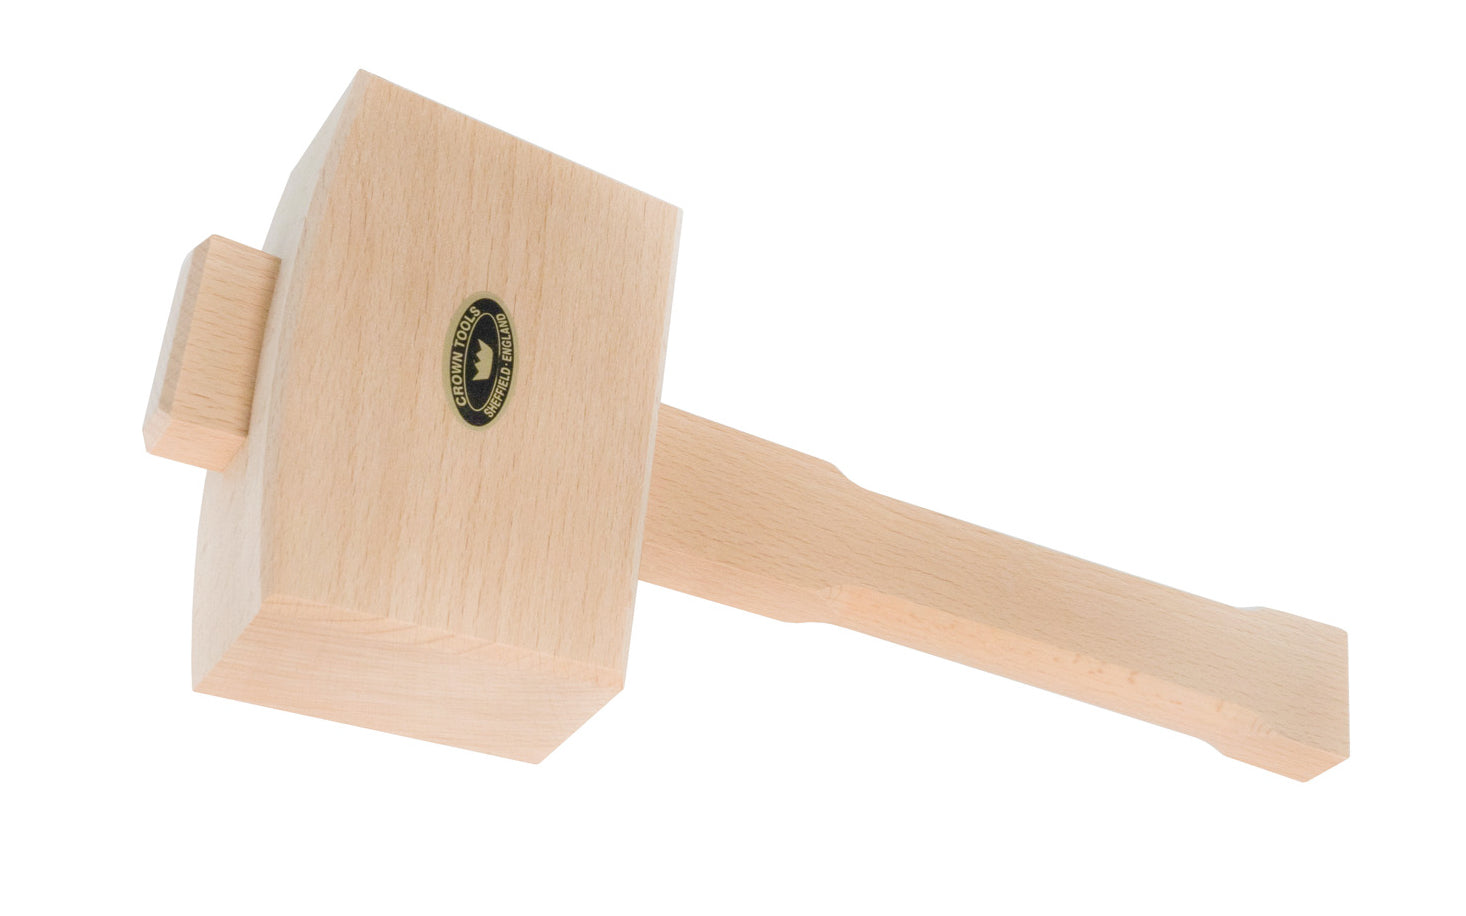 5" Beechwood mallet made by Crown Tools in England. Model 107. High quality mallet is very sturdy & durable. Manufactured from the finest kiln dried Beech. Great for woodworking applications, chisel work, cabinet making, boat building, furniture work, & other uses. Handle is not lacquered. Made in Sheffield, England. 